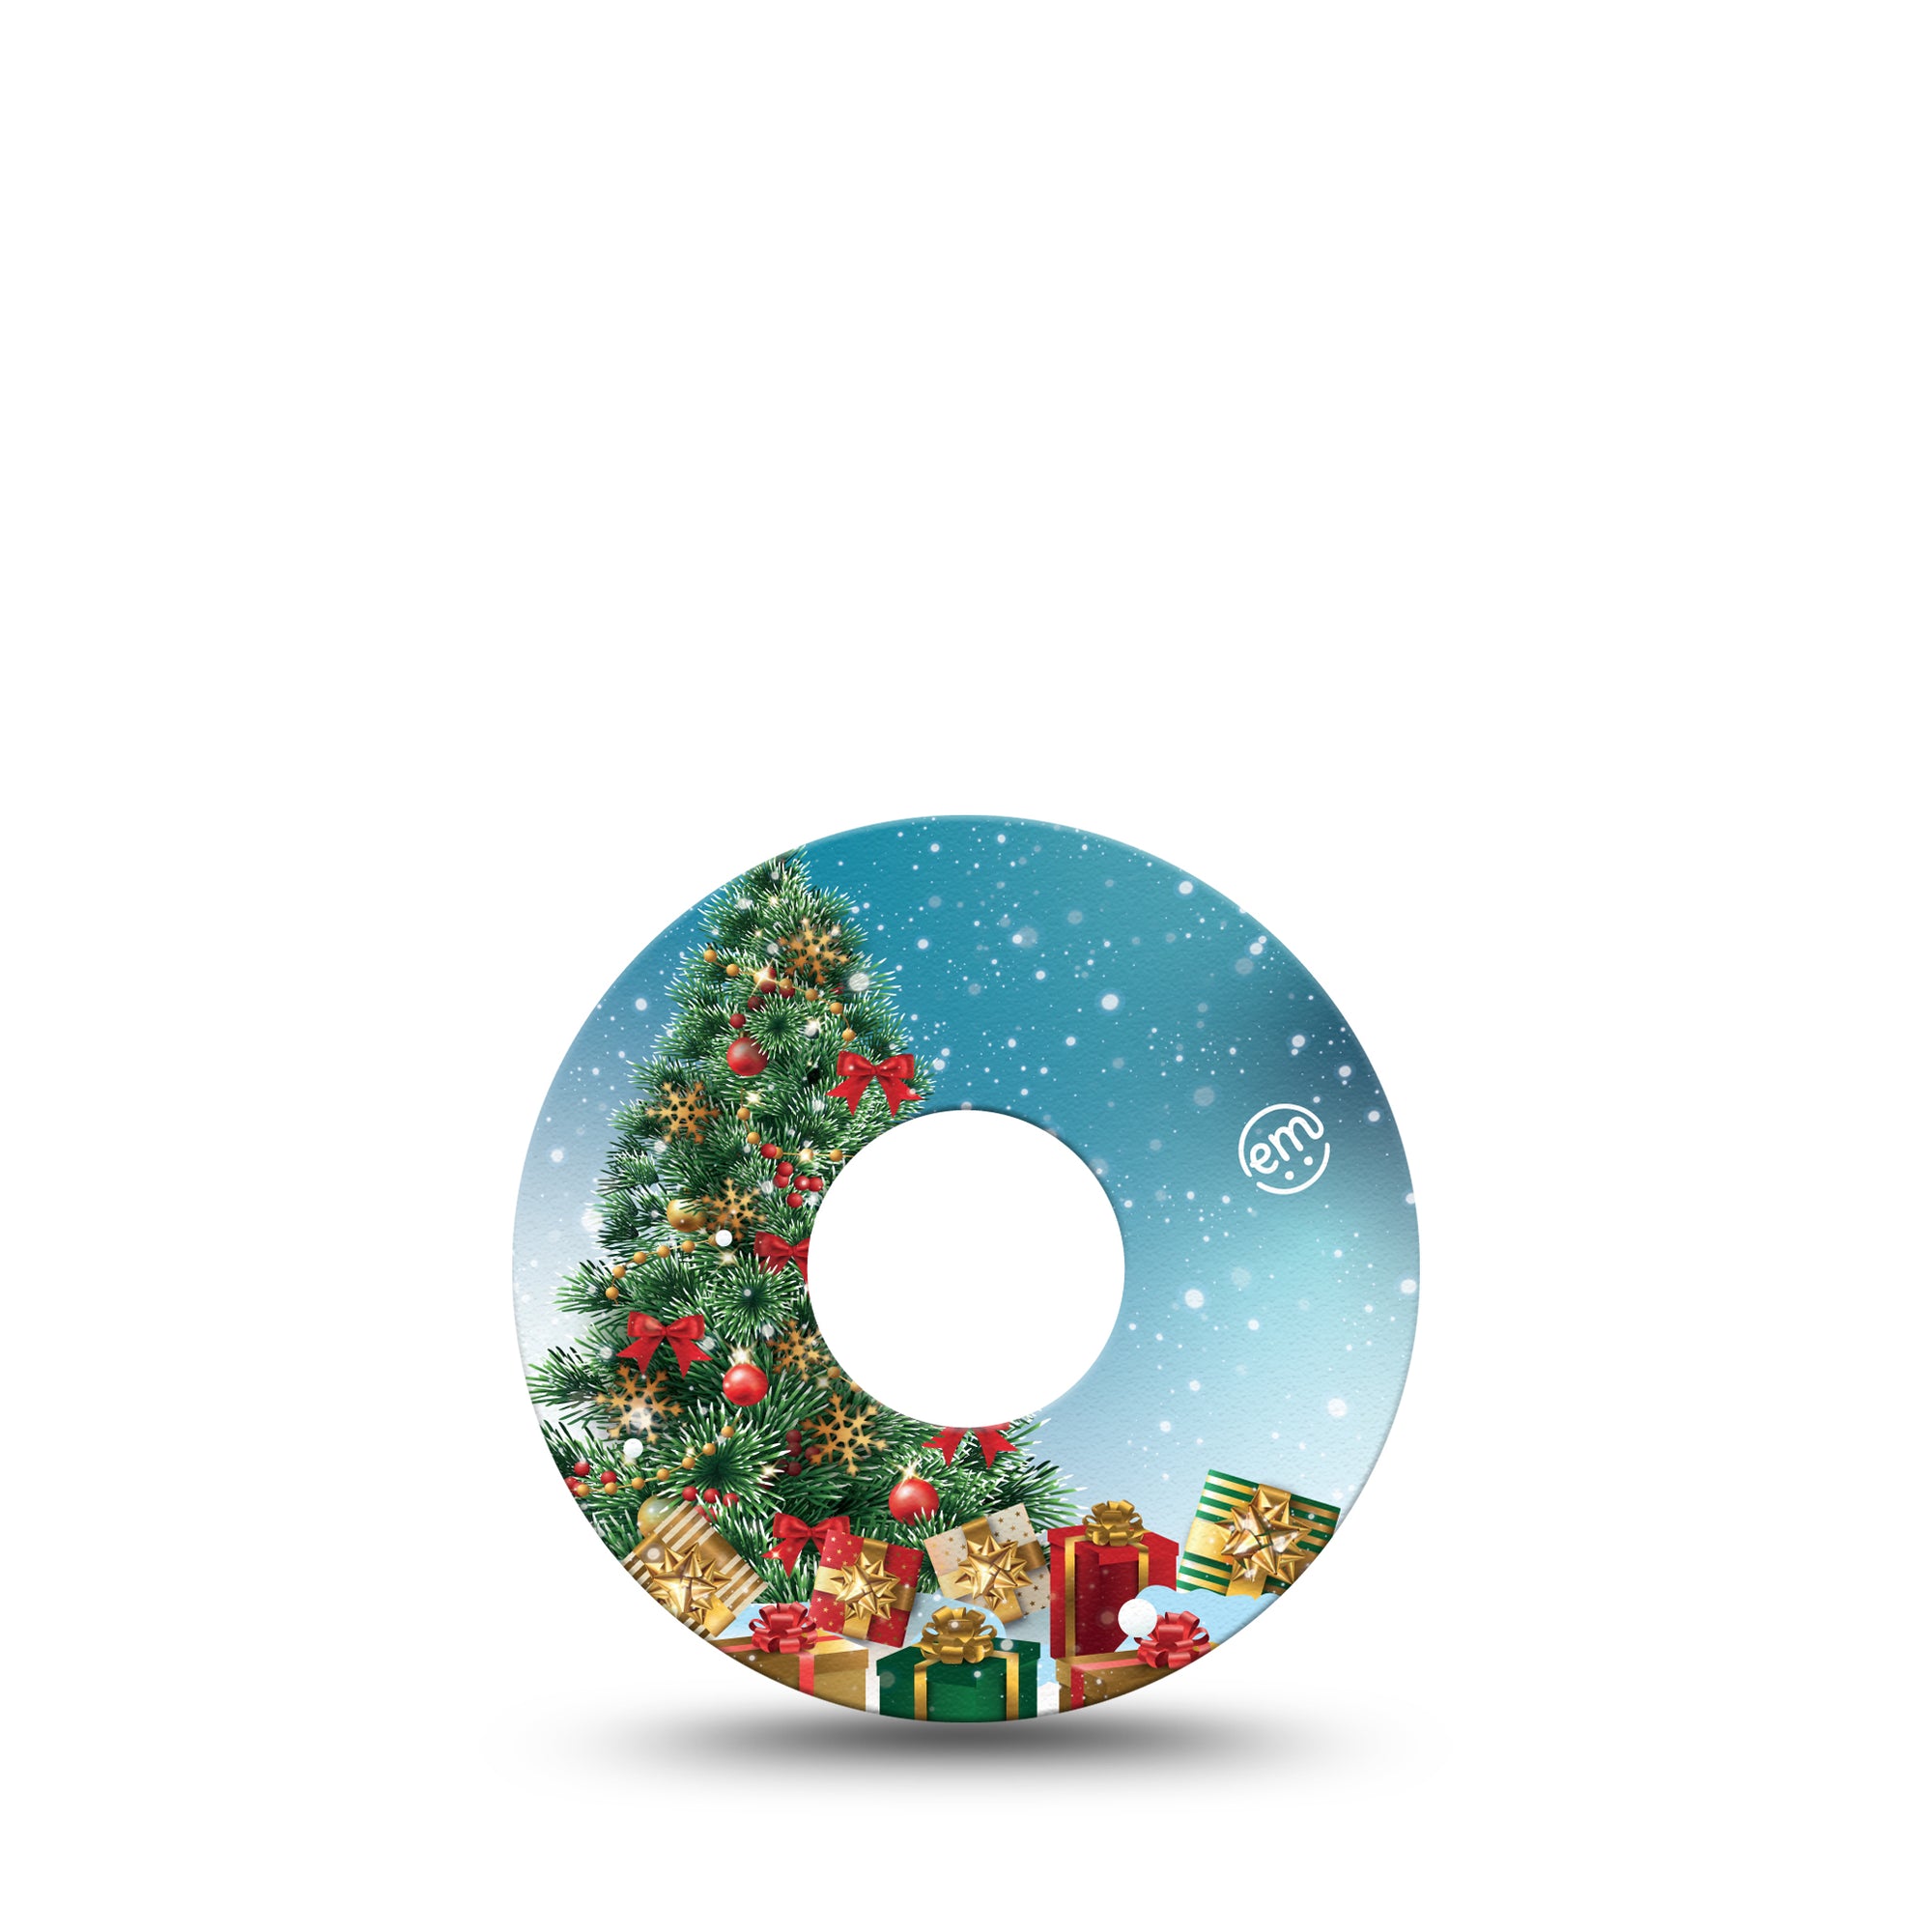 ExpressionMed Oh, Christmas Tree Libre 3 Tape, Single, Christmas Gifts & Tree Themed, CGM Overlay Patch Design